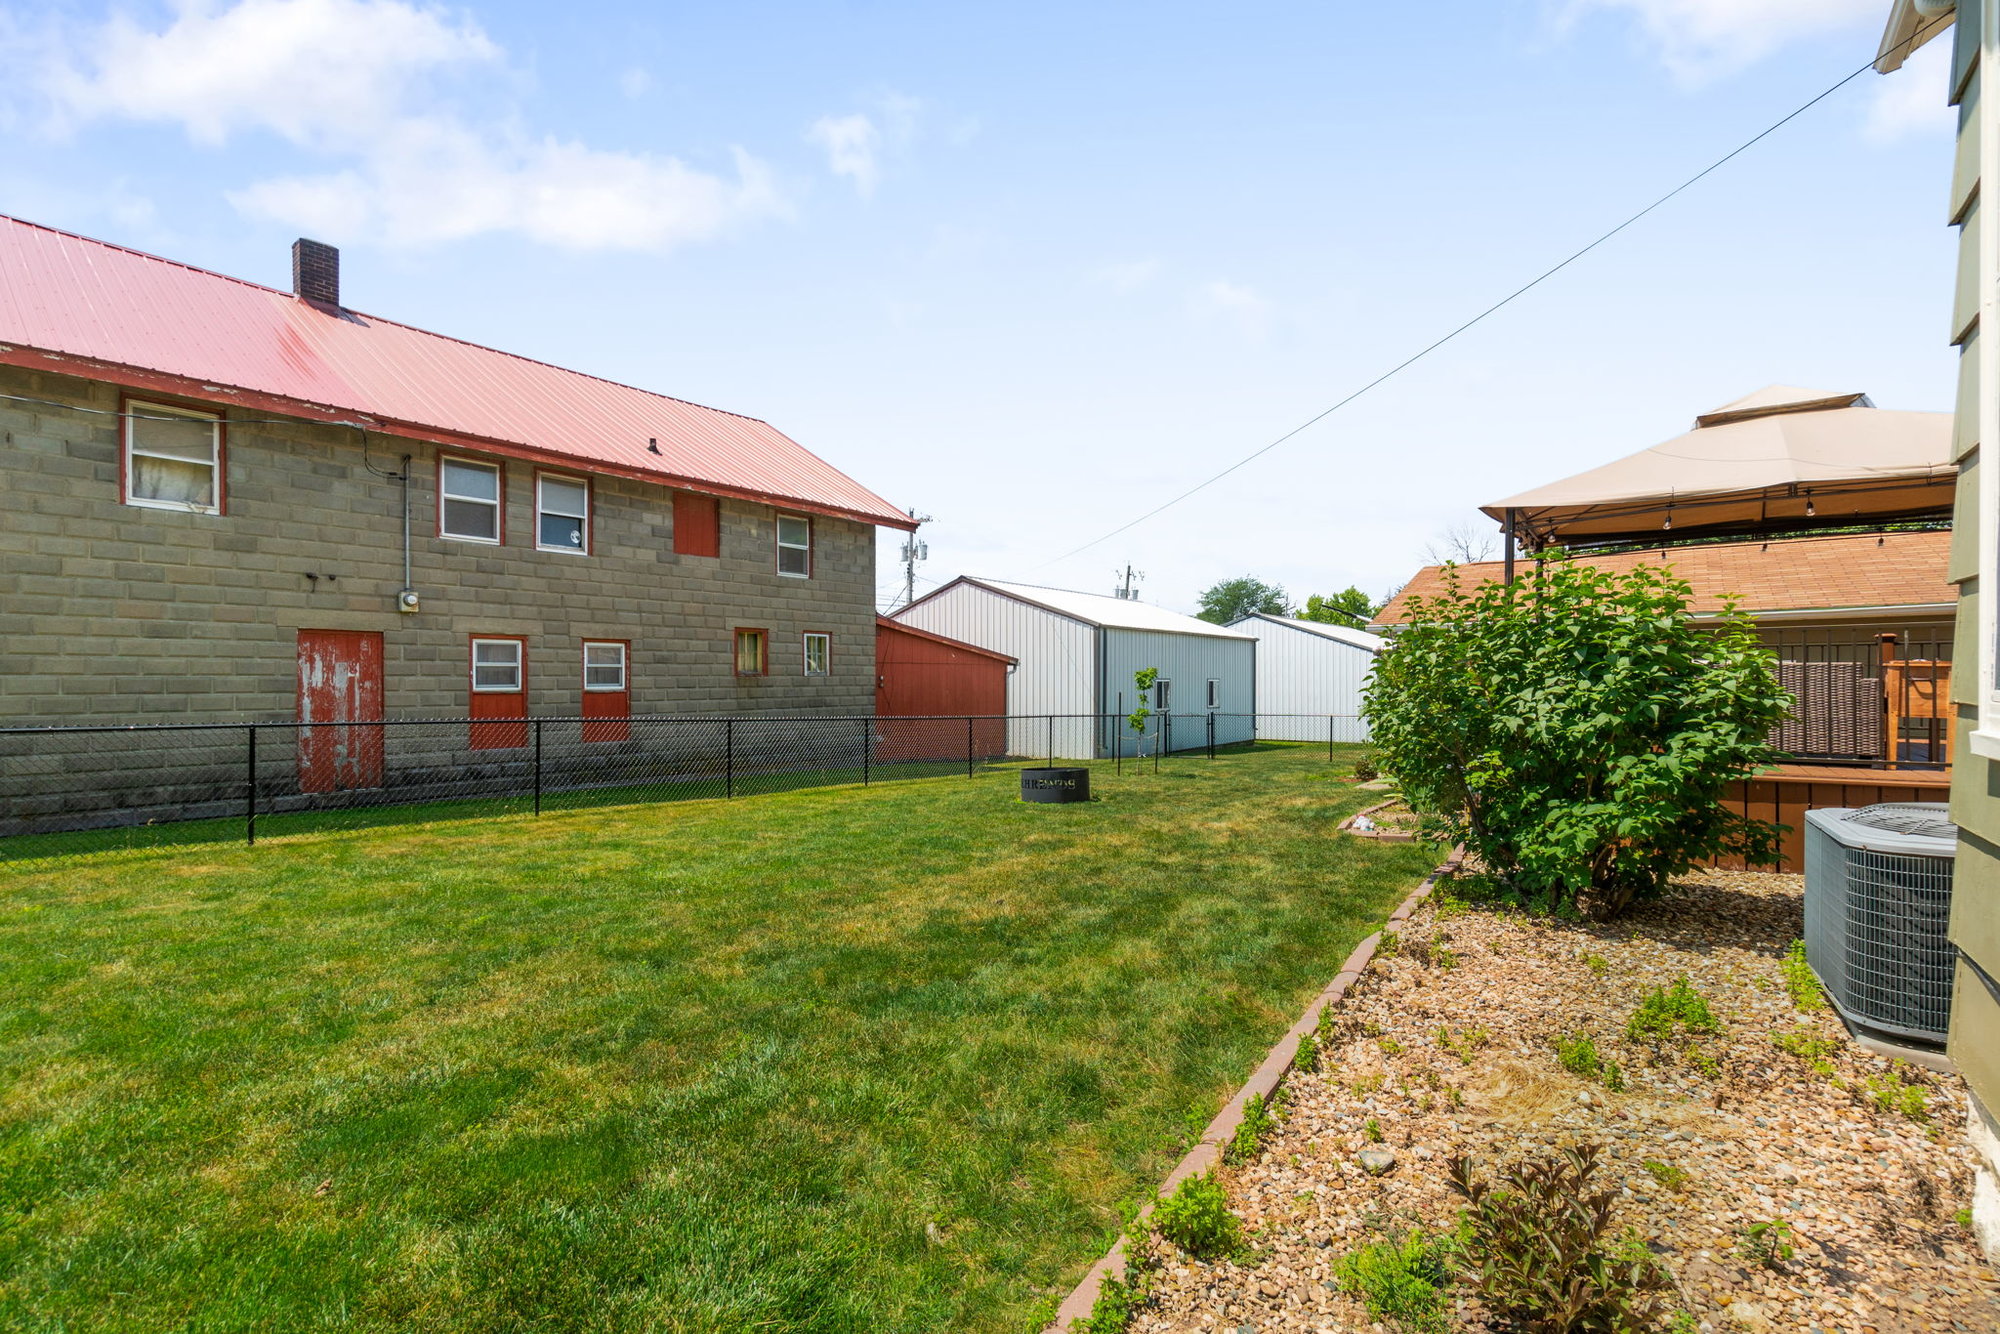 Everything You Need for Easy Living at this Home in the Heart of Traer Iowa